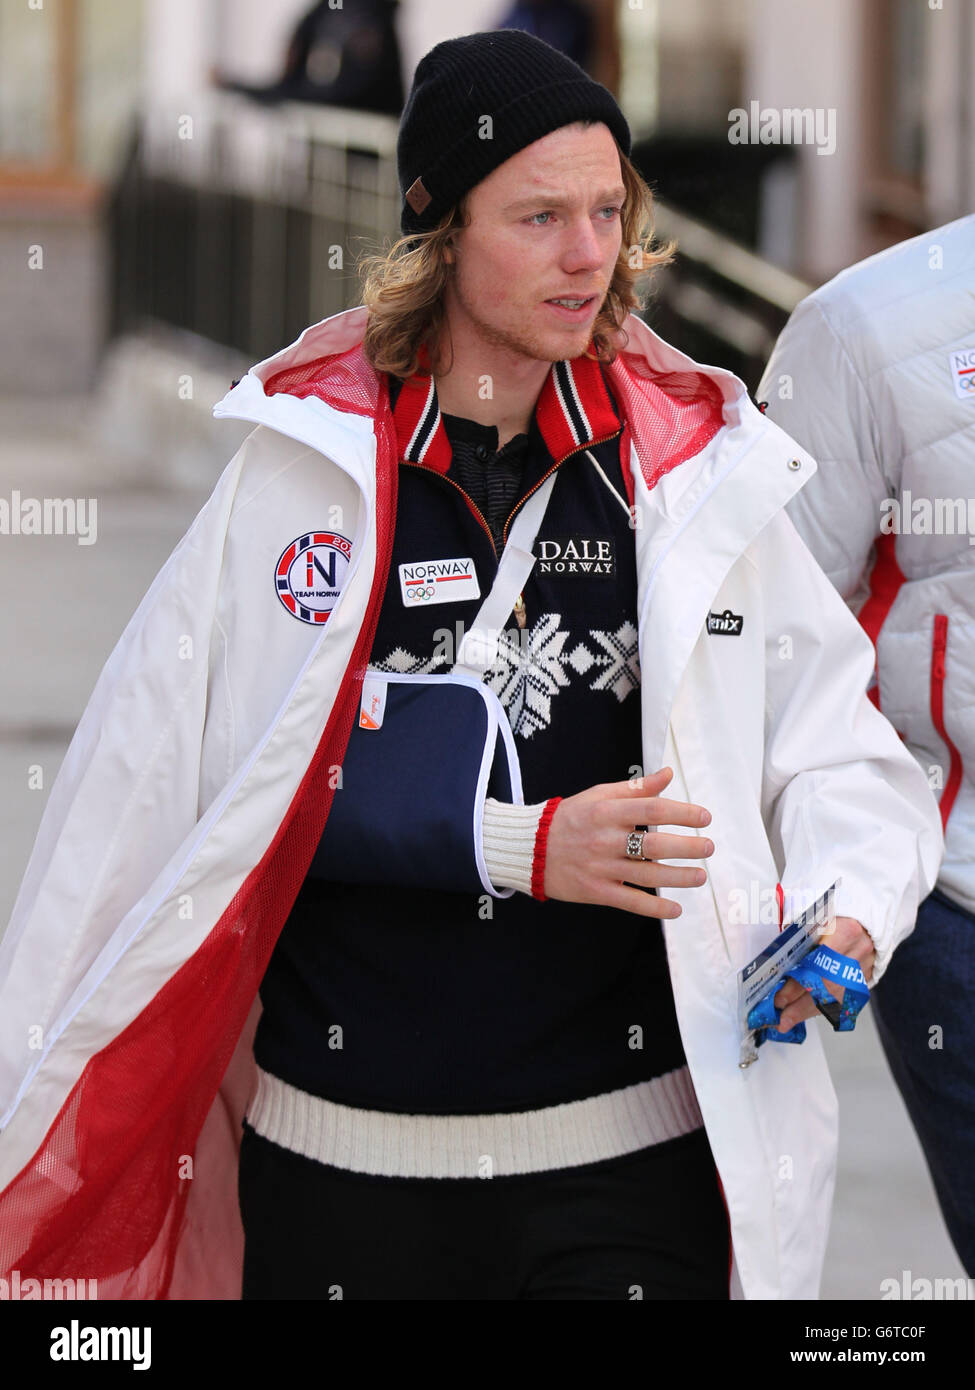 Norwegian slopestyle Olympic medal hope Torstein Horgmo who is out of the olympics walks through the Athletes Village after breaking his collarbone in training yesterday. Stock Photo